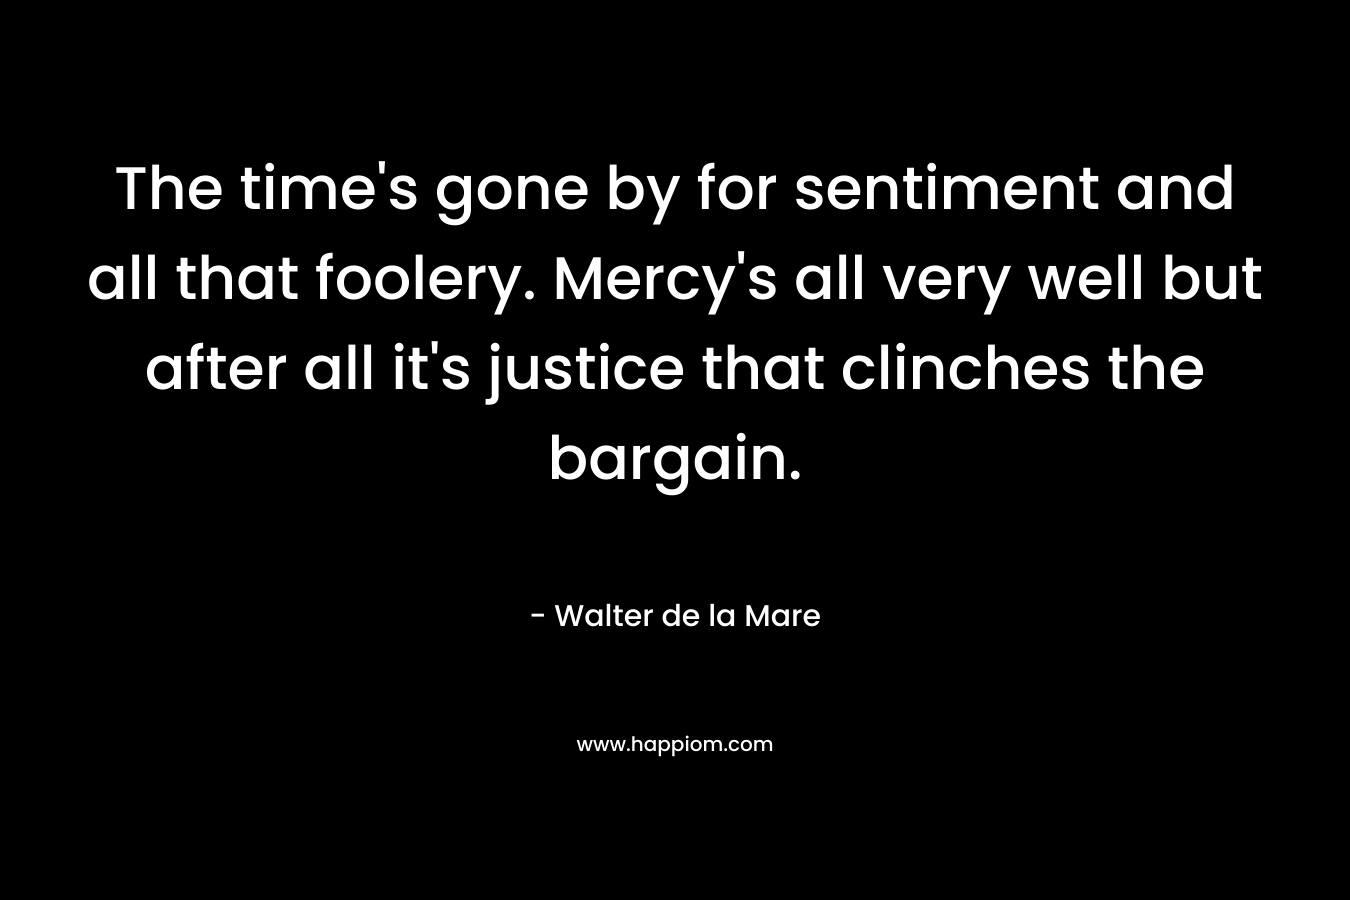 The time’s gone by for sentiment and all that foolery. Mercy’s all very well but after all it’s justice that clinches the bargain. – Walter de la Mare